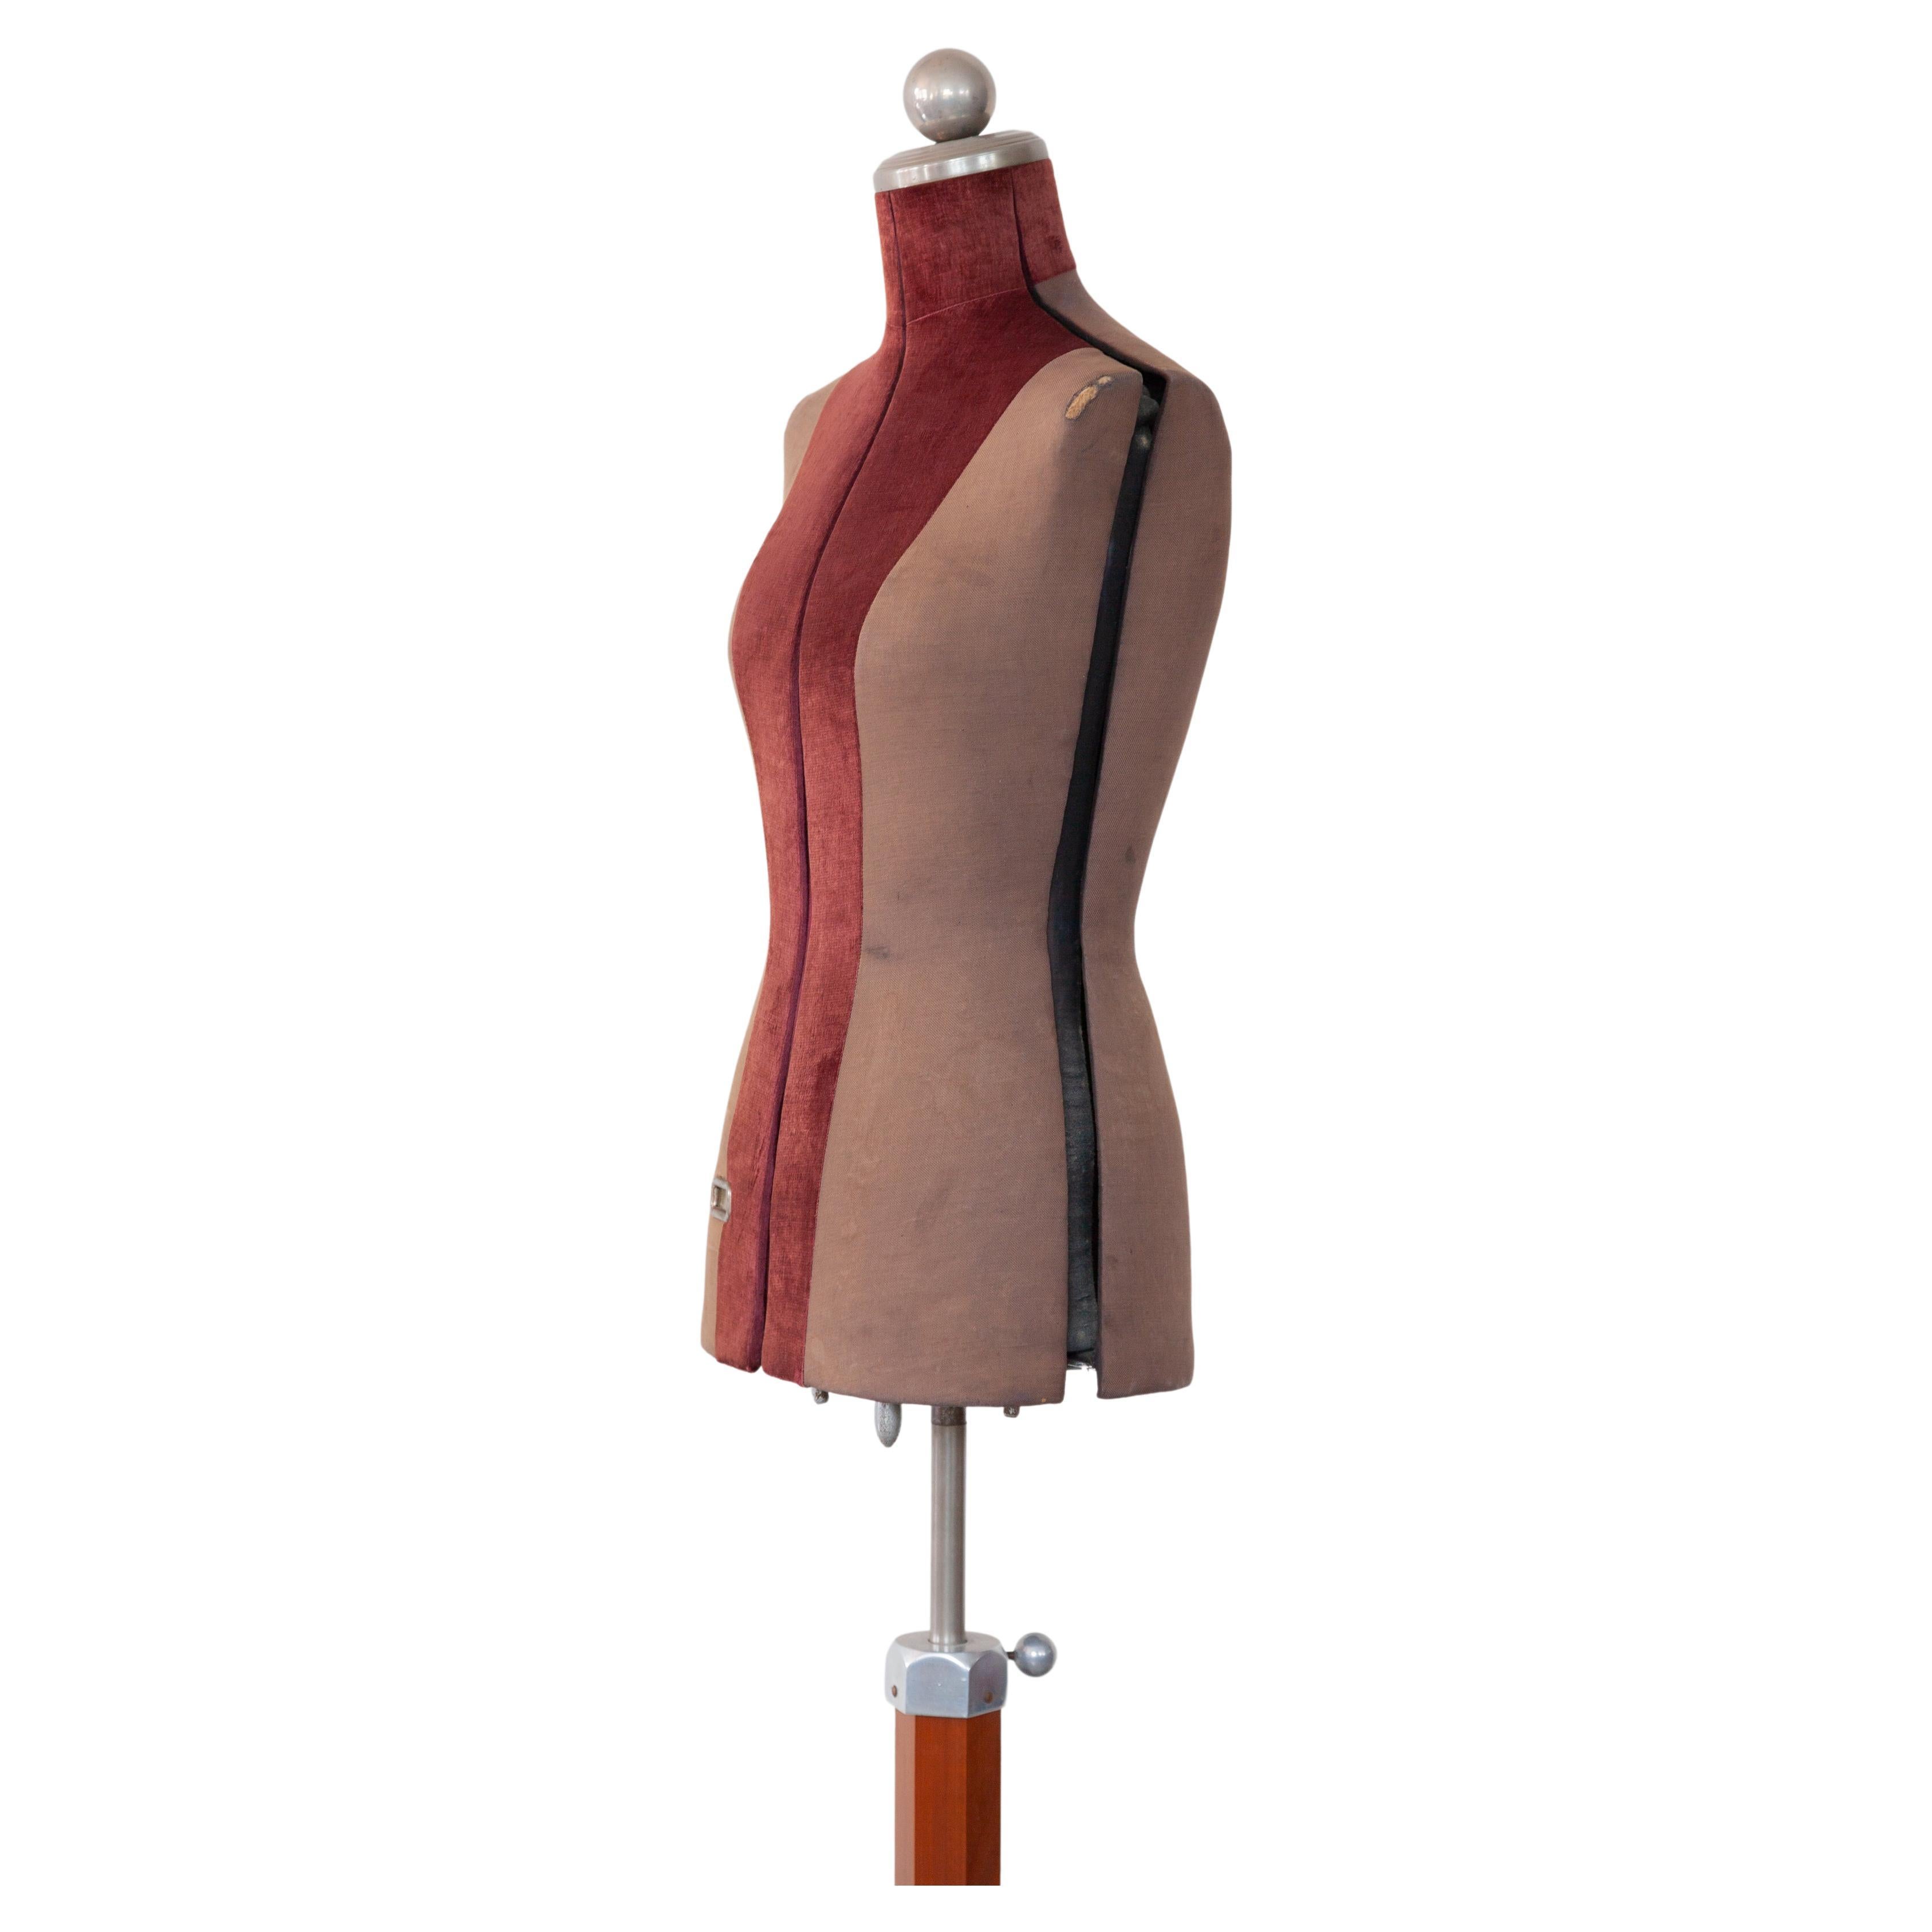 Art-Deco dress form mannequin France 1930s The torso is made from papier-mâché with a red velvet covering. The stand is made from aluminum with wood. The figure is in height adjustable.
Female plus size 38-44.